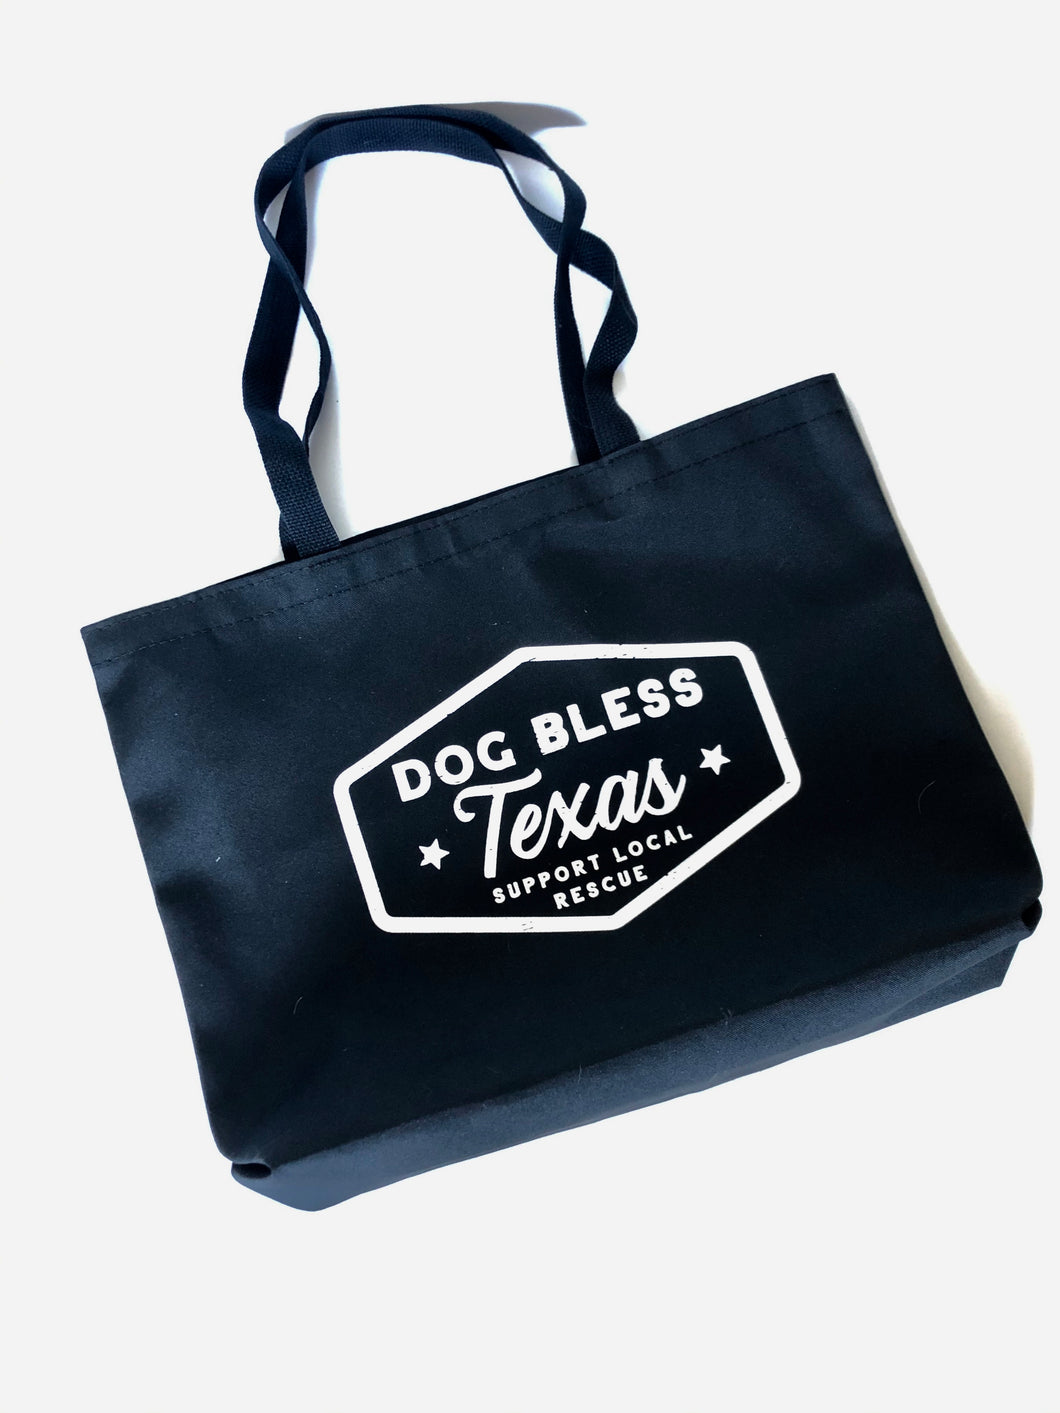 Dog Bless Texas Tote in Black